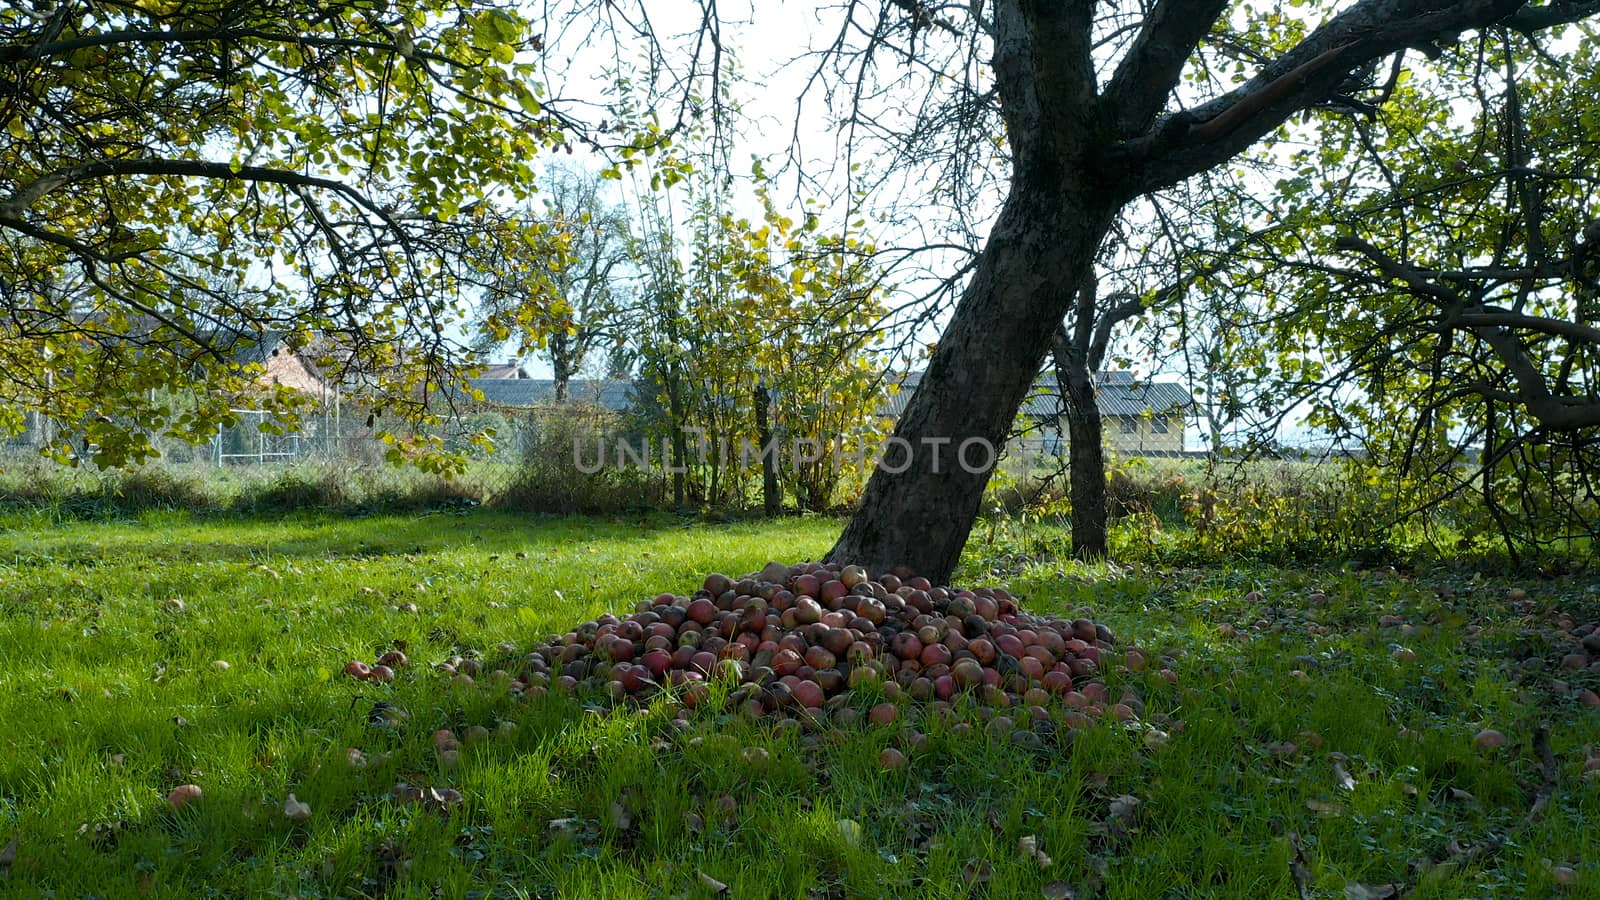 Pile of apples beneath an apple tree in an orchard, non treated ecologial and biological apples in organic production left under the tree after harvest